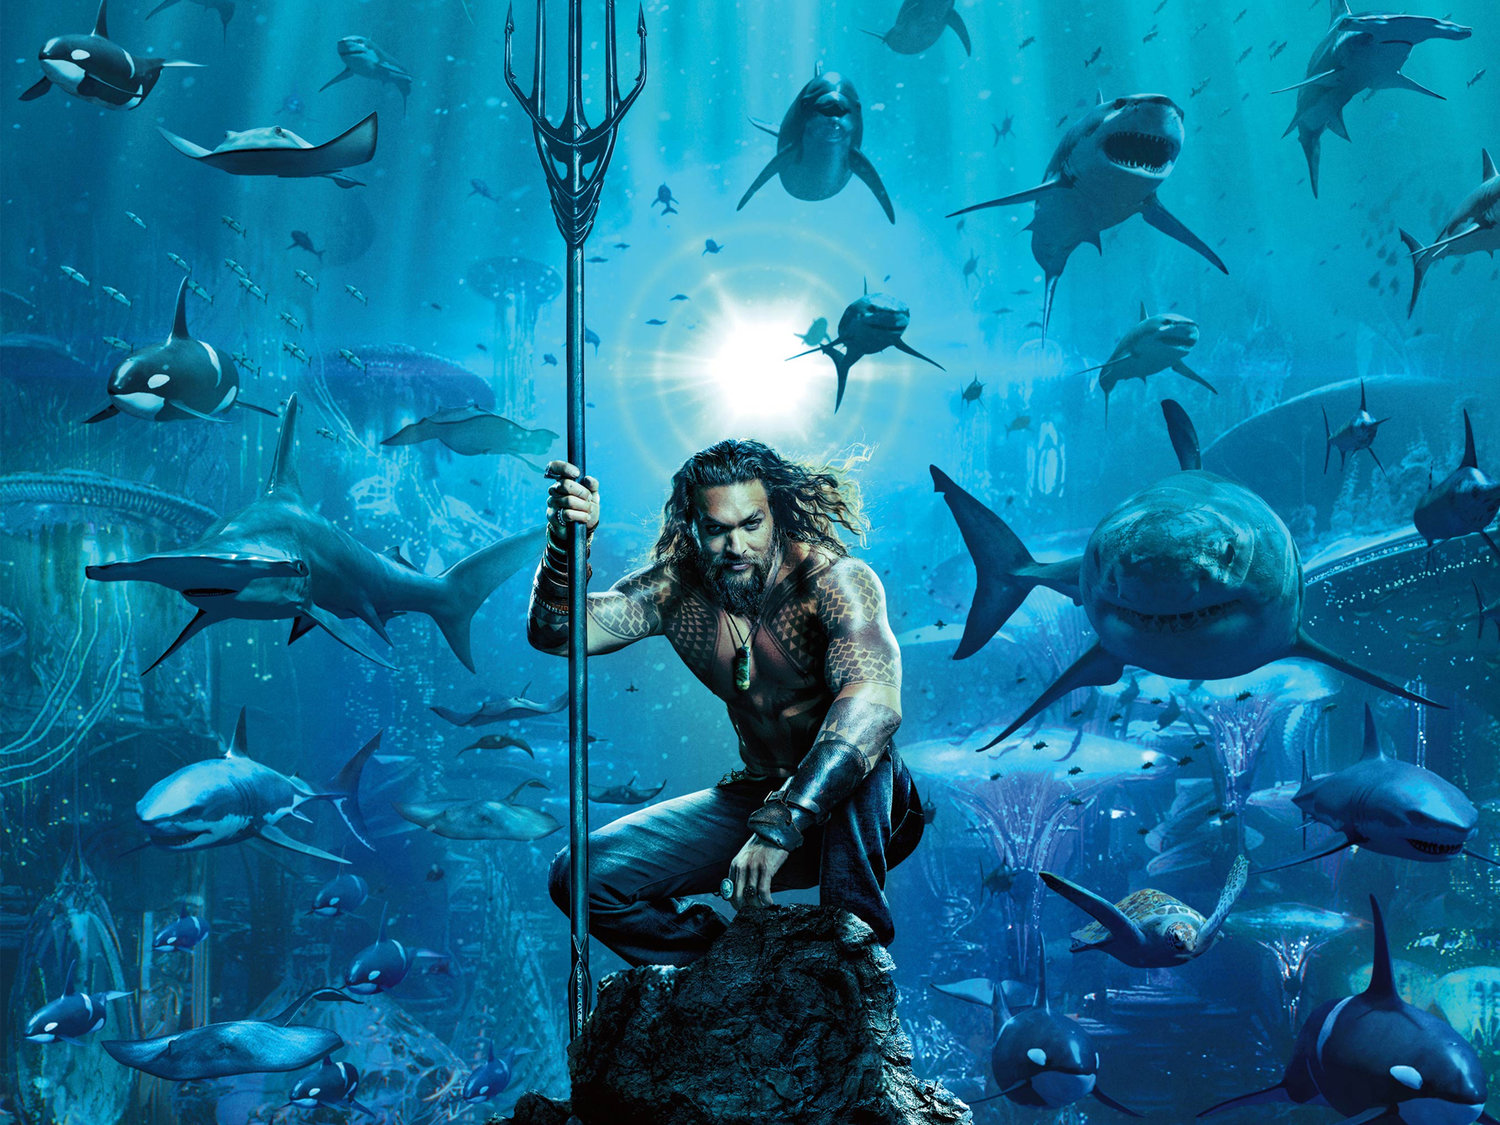 The climactic battle scene from Aquaman that takes place underwater, combining sea monsters and animals.The climactic battle scene from Aquaman that takes place underwater, combining sea monsters and animals.The climactic battle scene from Aquaman that takes place underwater, combining sea monsters and animals.The climactic battle scene from Aquaman that takes place underwater, combining sea monsters and animals.The climactic battle scene from Aquaman that takes place underwater, combining sea monsters and animals.The climactic battle scene from Aquaman that takes place underwater, combining sea monsters and animals.The climactic battle scene from Aquaman that takes place underwater, combining sea monsters and animals.The climactic battle scene from Aquaman that takes place underwater, combining sea monsters and animals.The climactic battle scene from Aquaman that takes place underwater, combining sea monsters and animals.